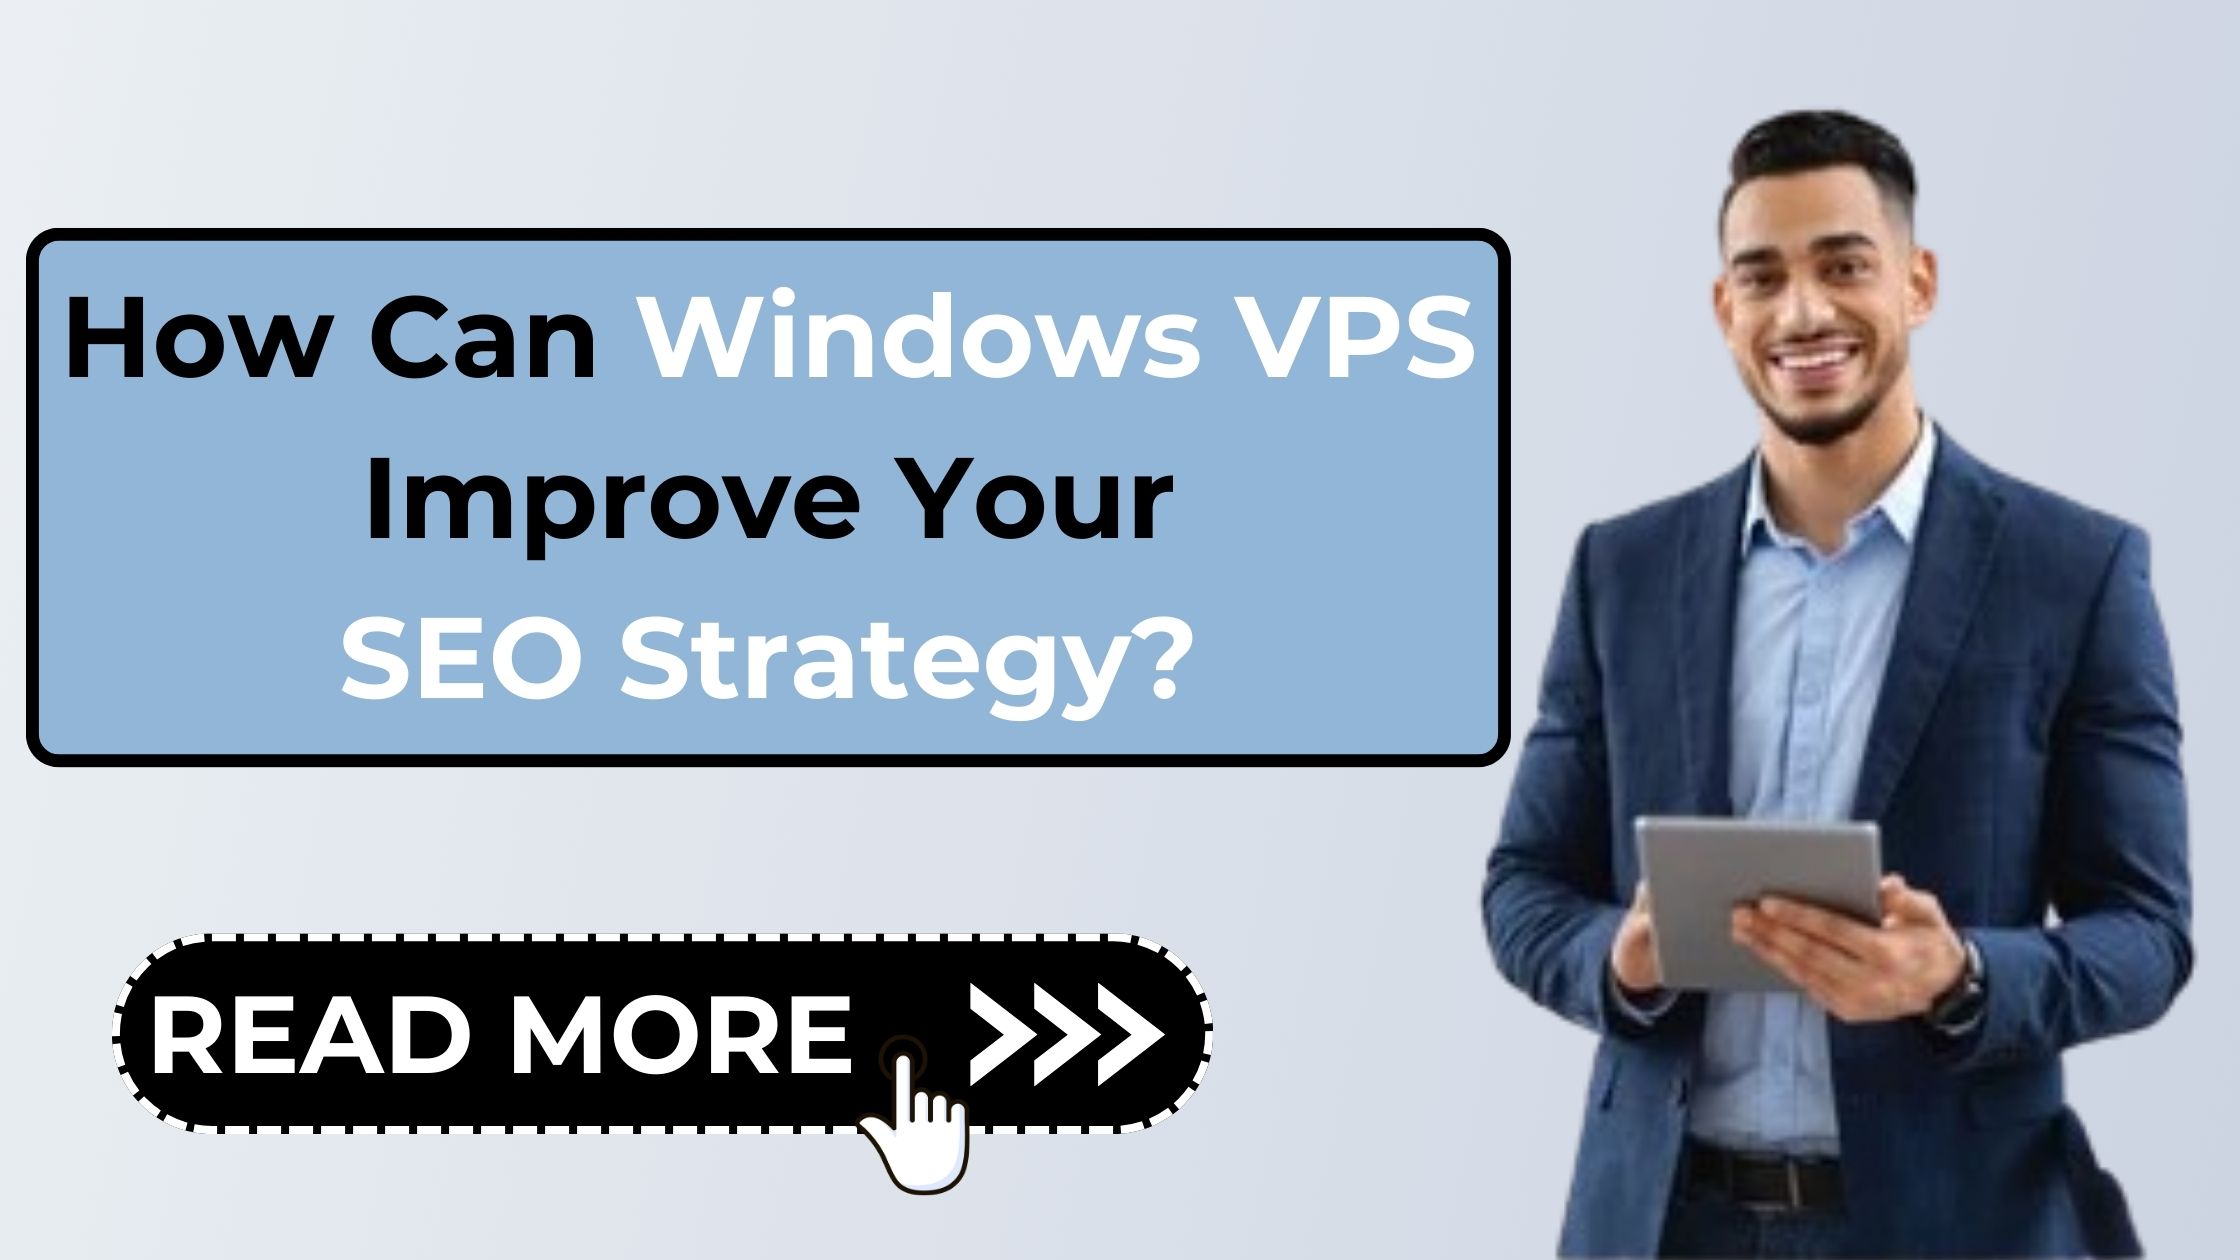 How Can Windows VPS Improve Your SEO Strategy?